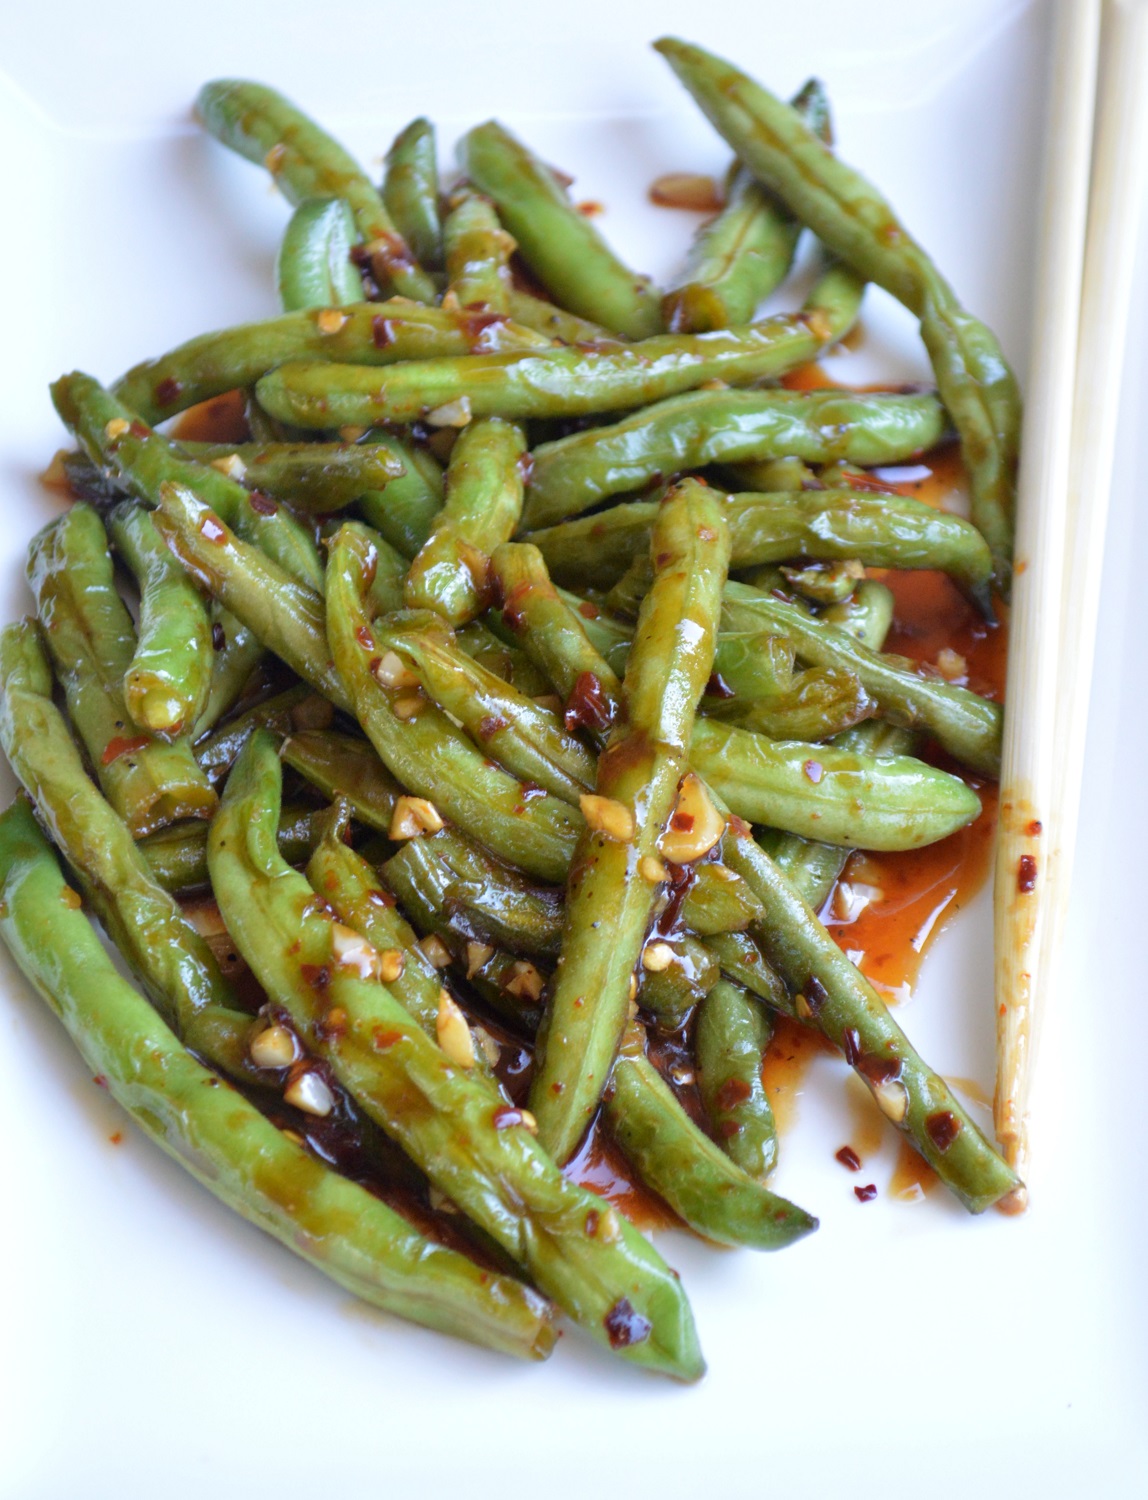 This plate of Spicy Green Beans tastes just like PF Chang's